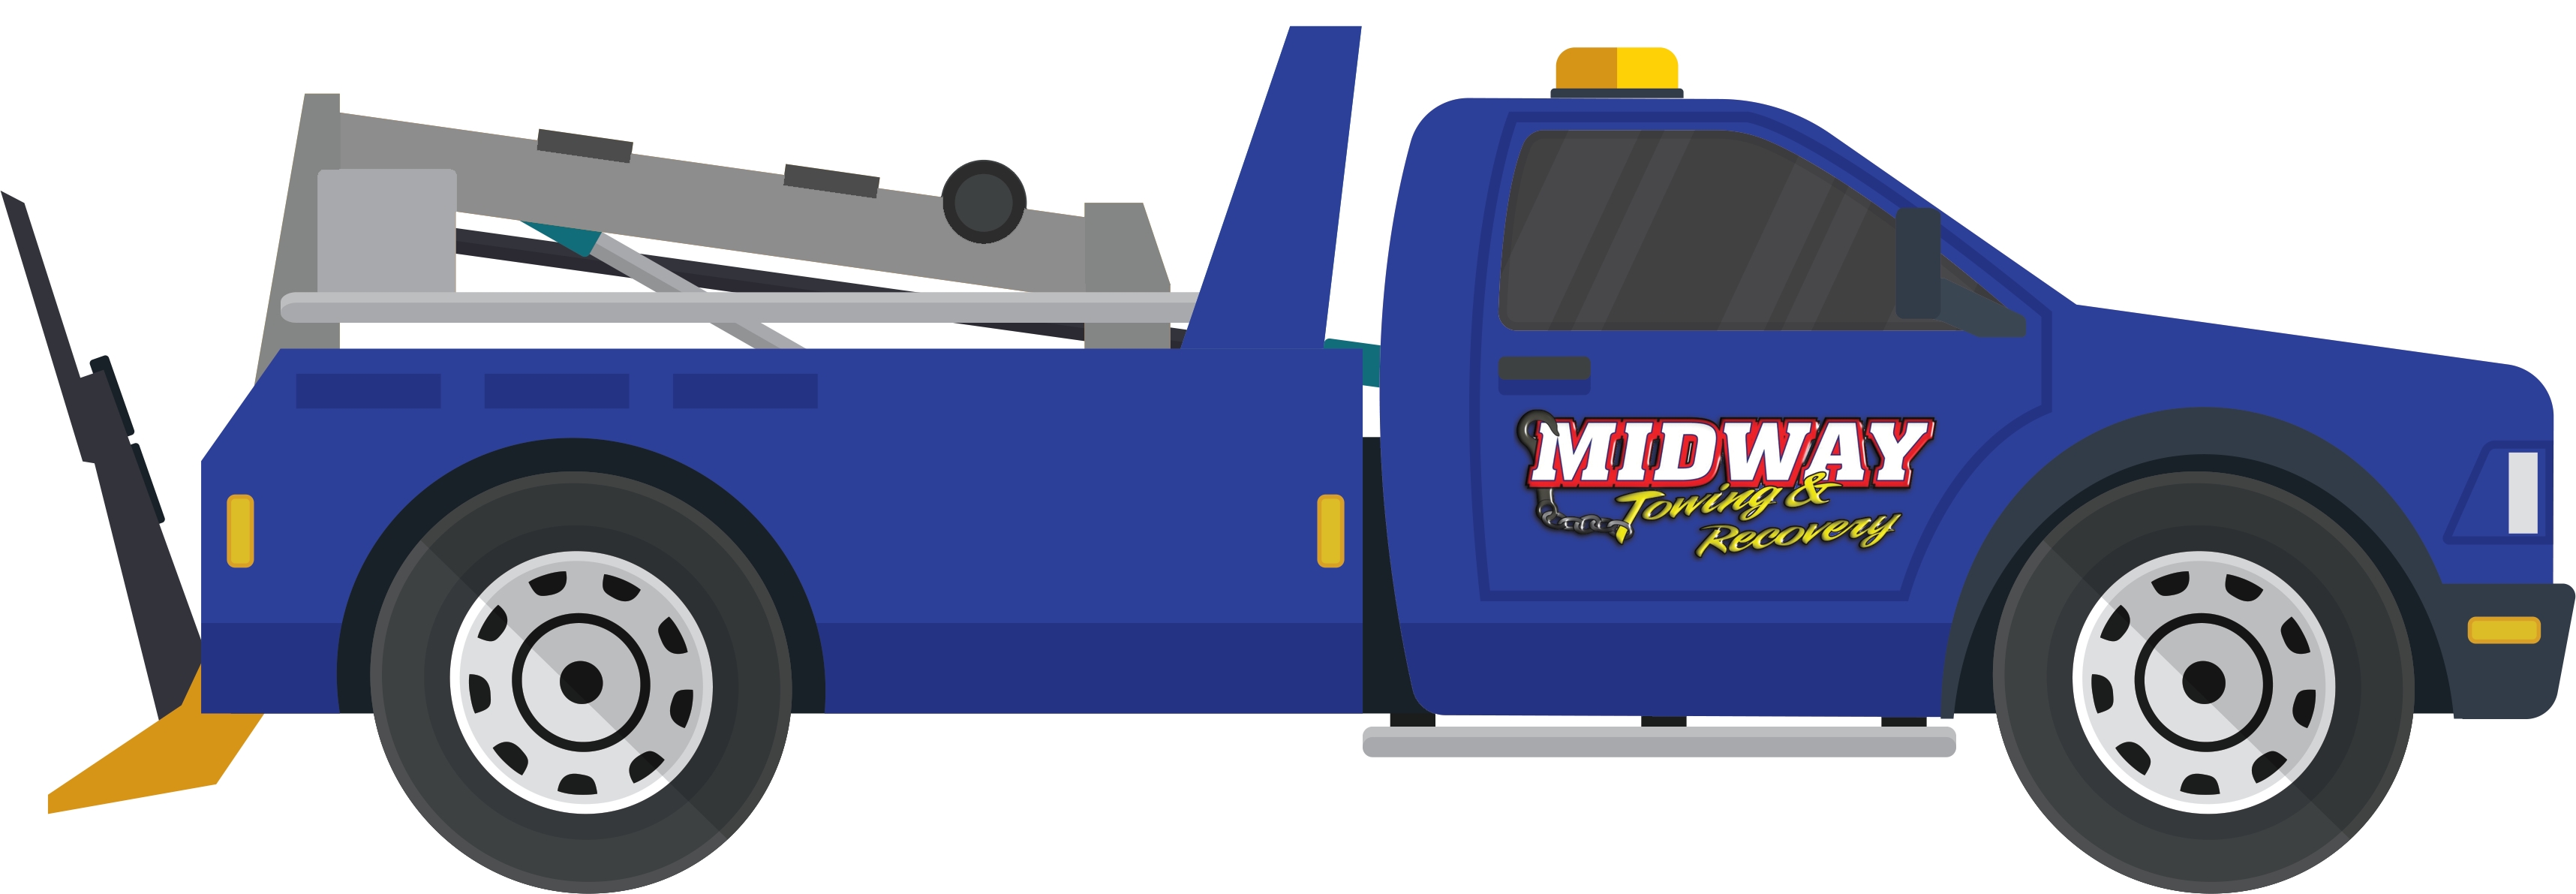 Midway Towing & Recovery stands ready to help you whenever light-medium duty truck towing in the Richmond, Virginia area is needed.